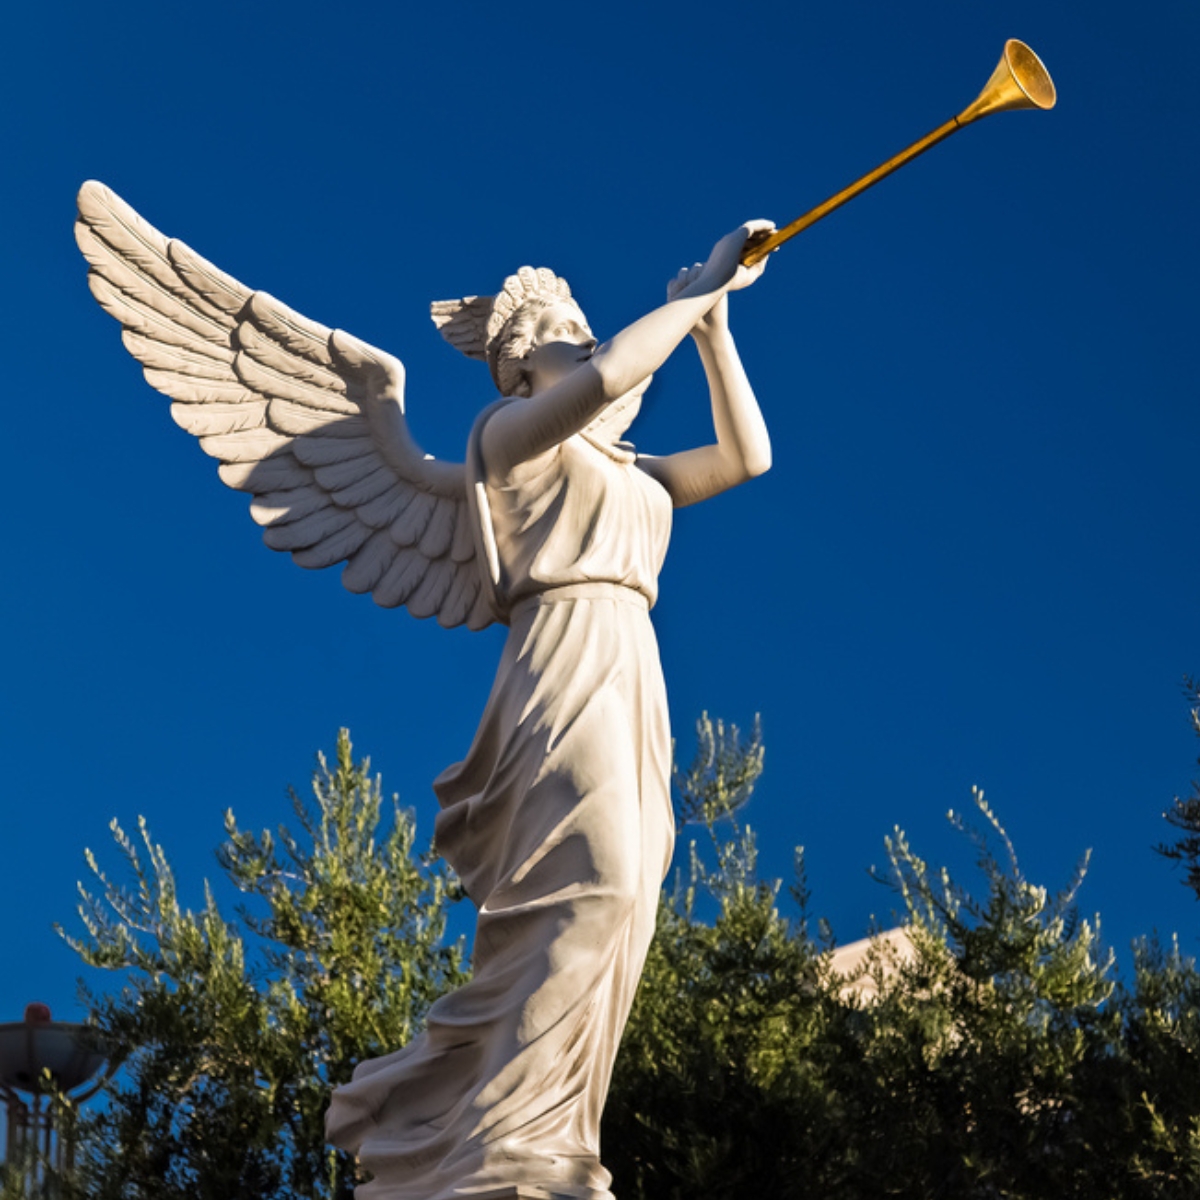 image of statue of angel blowing trumpet for the post on the seven trumpets in the Bible